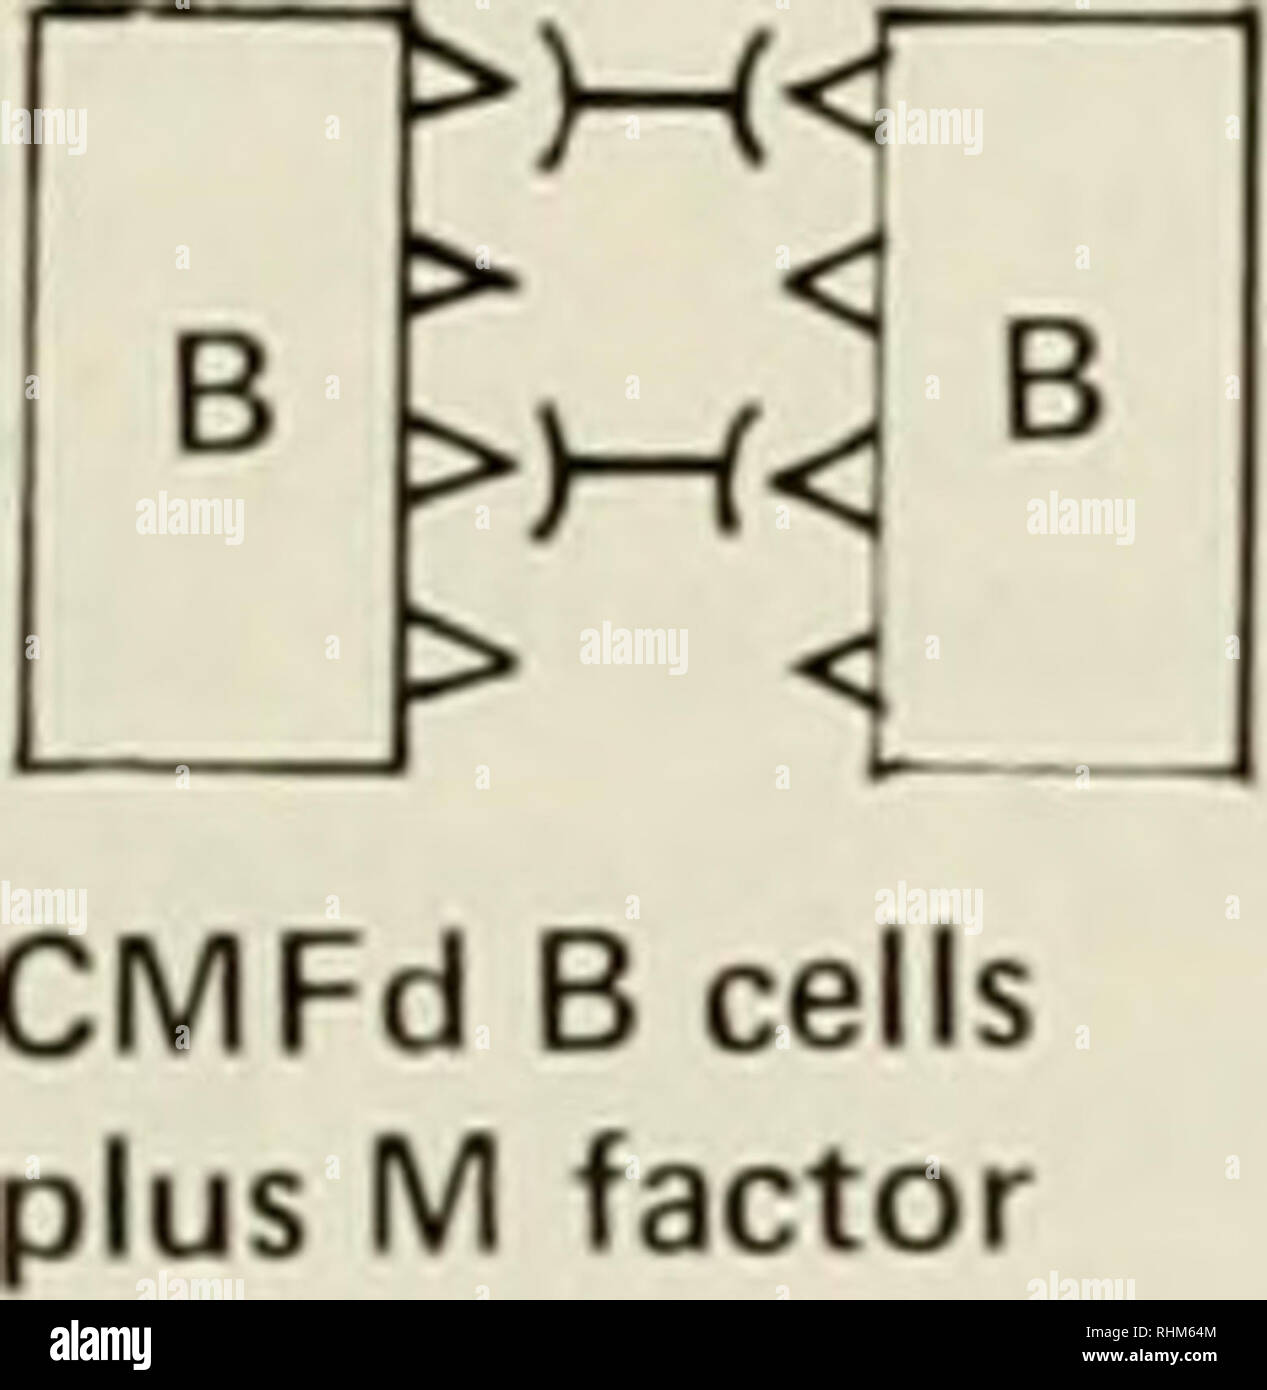 . The Biological bulletin. Biology; Zoology; Marine biology. SPON'GE CELL ADHESION&quot; 12 &gt;—( Mil lull Mill I I I &gt; B &gt; &gt; &gt; 0 Factors &amp; CMFd Cells mi. Aggregates of md cells or CMFd cells plus respective factor 3)—(&lt; )—(&lt; 3 [ B 0 3 ' C 0 CMFd M &amp; B cells plus M factor Unaggregated CMFd O ceils plus M factor Figure 6. A symmetrical factor mechanism sufficient to explain the results reported here. The symbols are the same as in Figure 5, with the addition that B denotes Halichondria bower- banki and 0 denotes Haliclona occulata. M and B factors adhere more strong Stock Photo